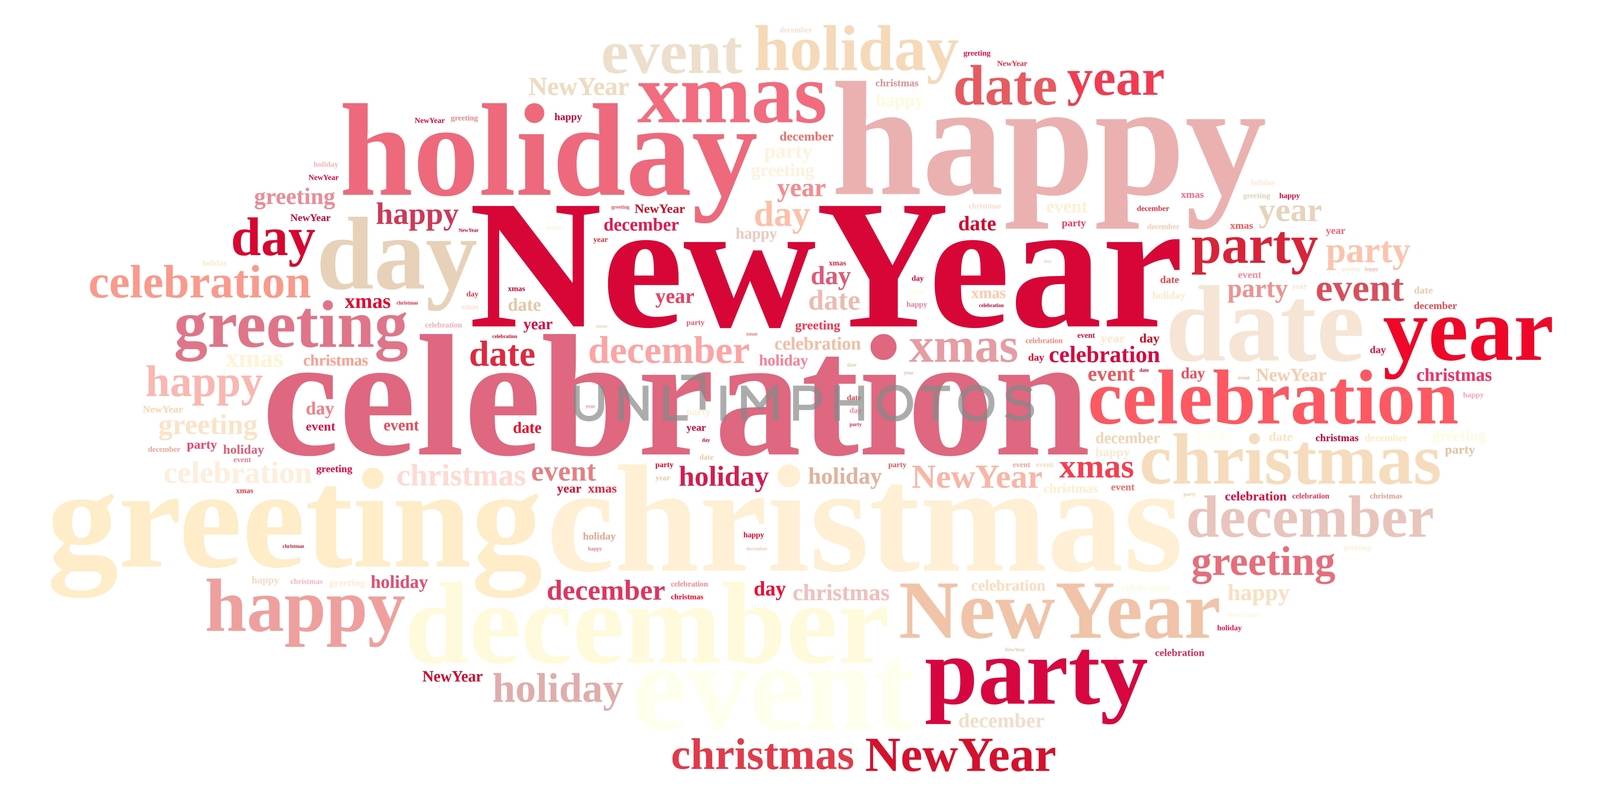 Illustration with word cloud about the New Year.